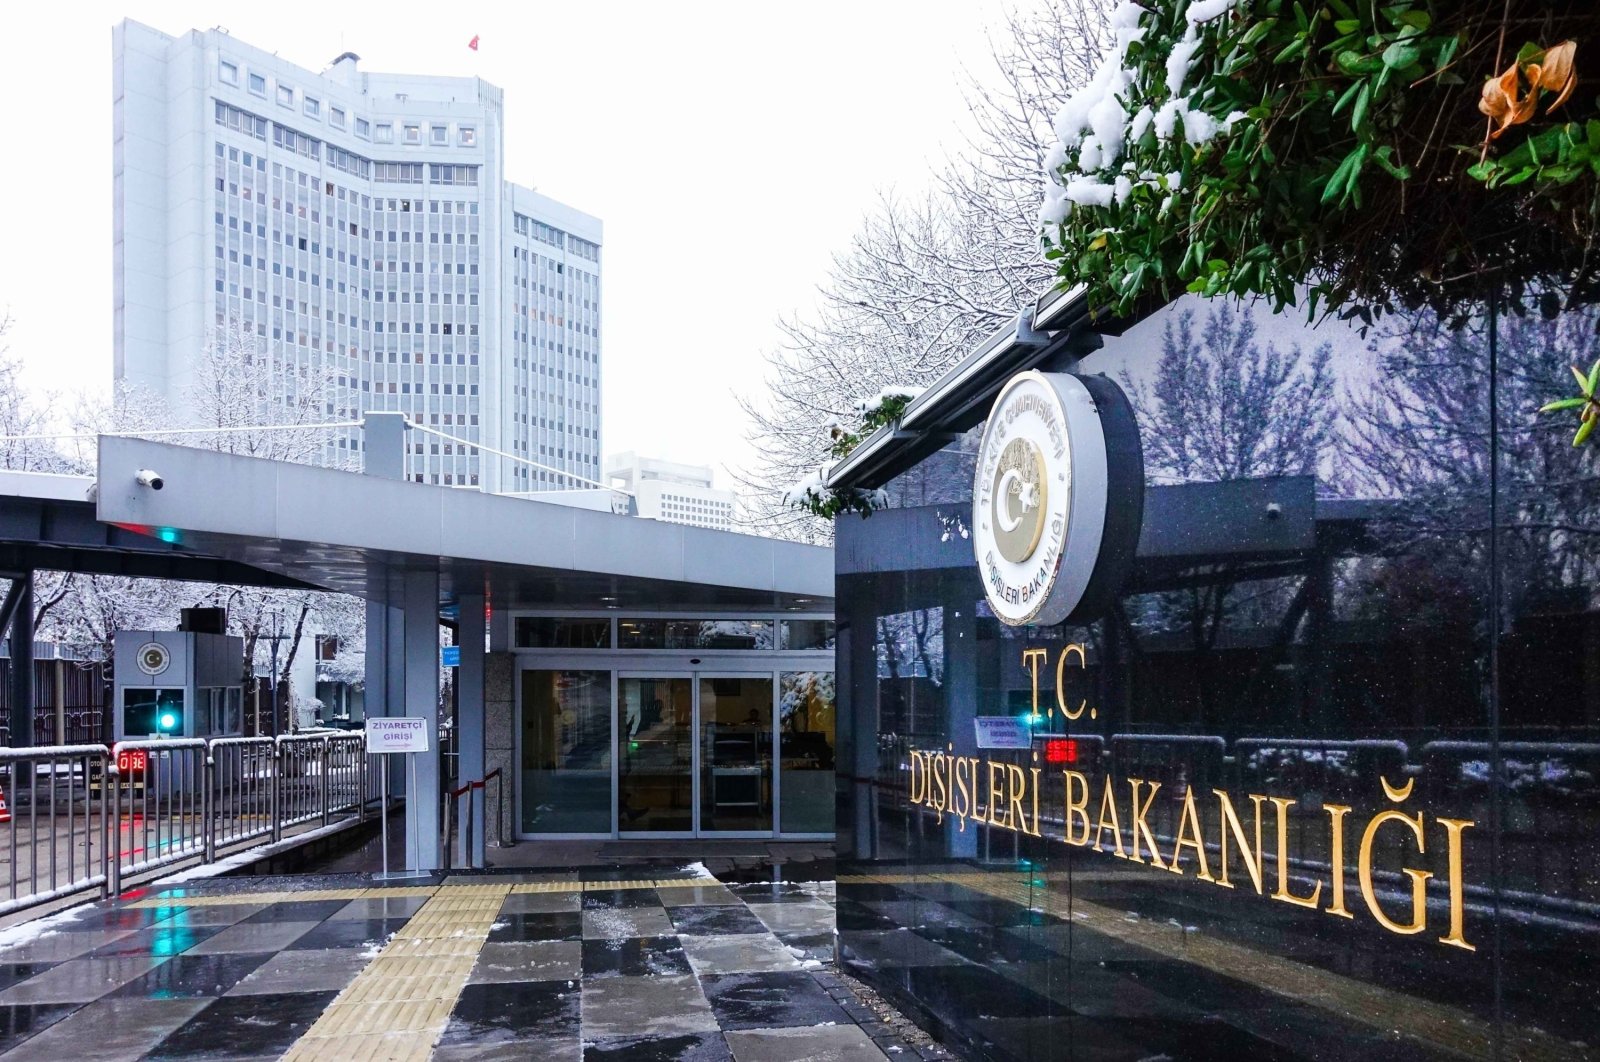 Ministry of Foreign Affairs headquarters in Ankara, Turkey in this undated file photo. (File Photo)